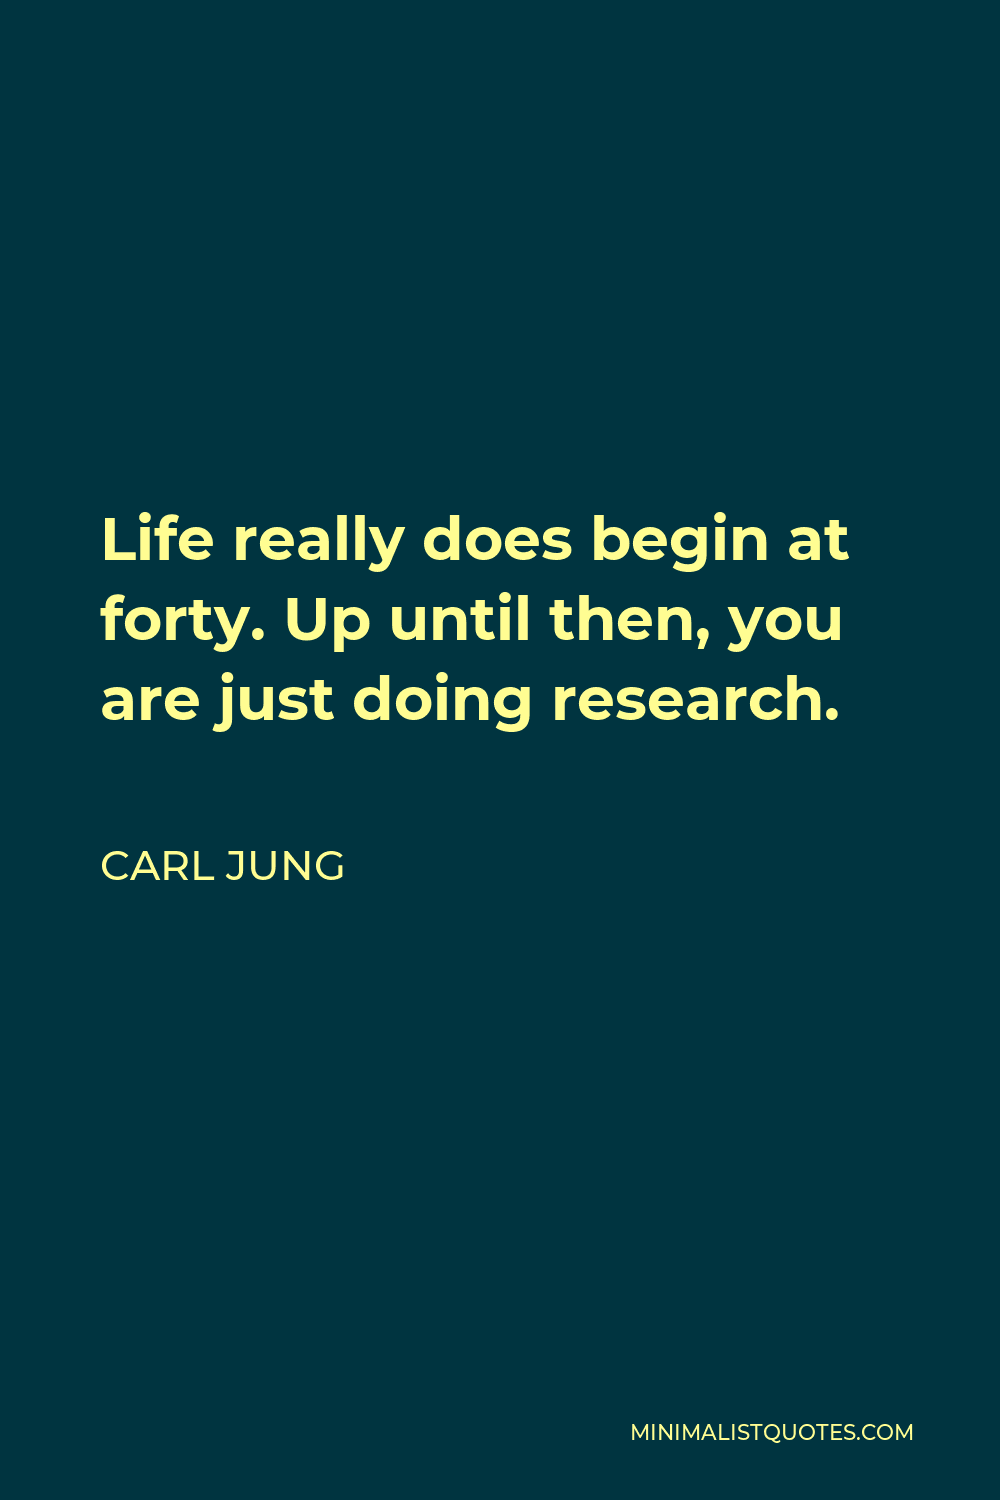 Carl Jung Quote - Life really does begin at forty. Up until then, you are just doing research.